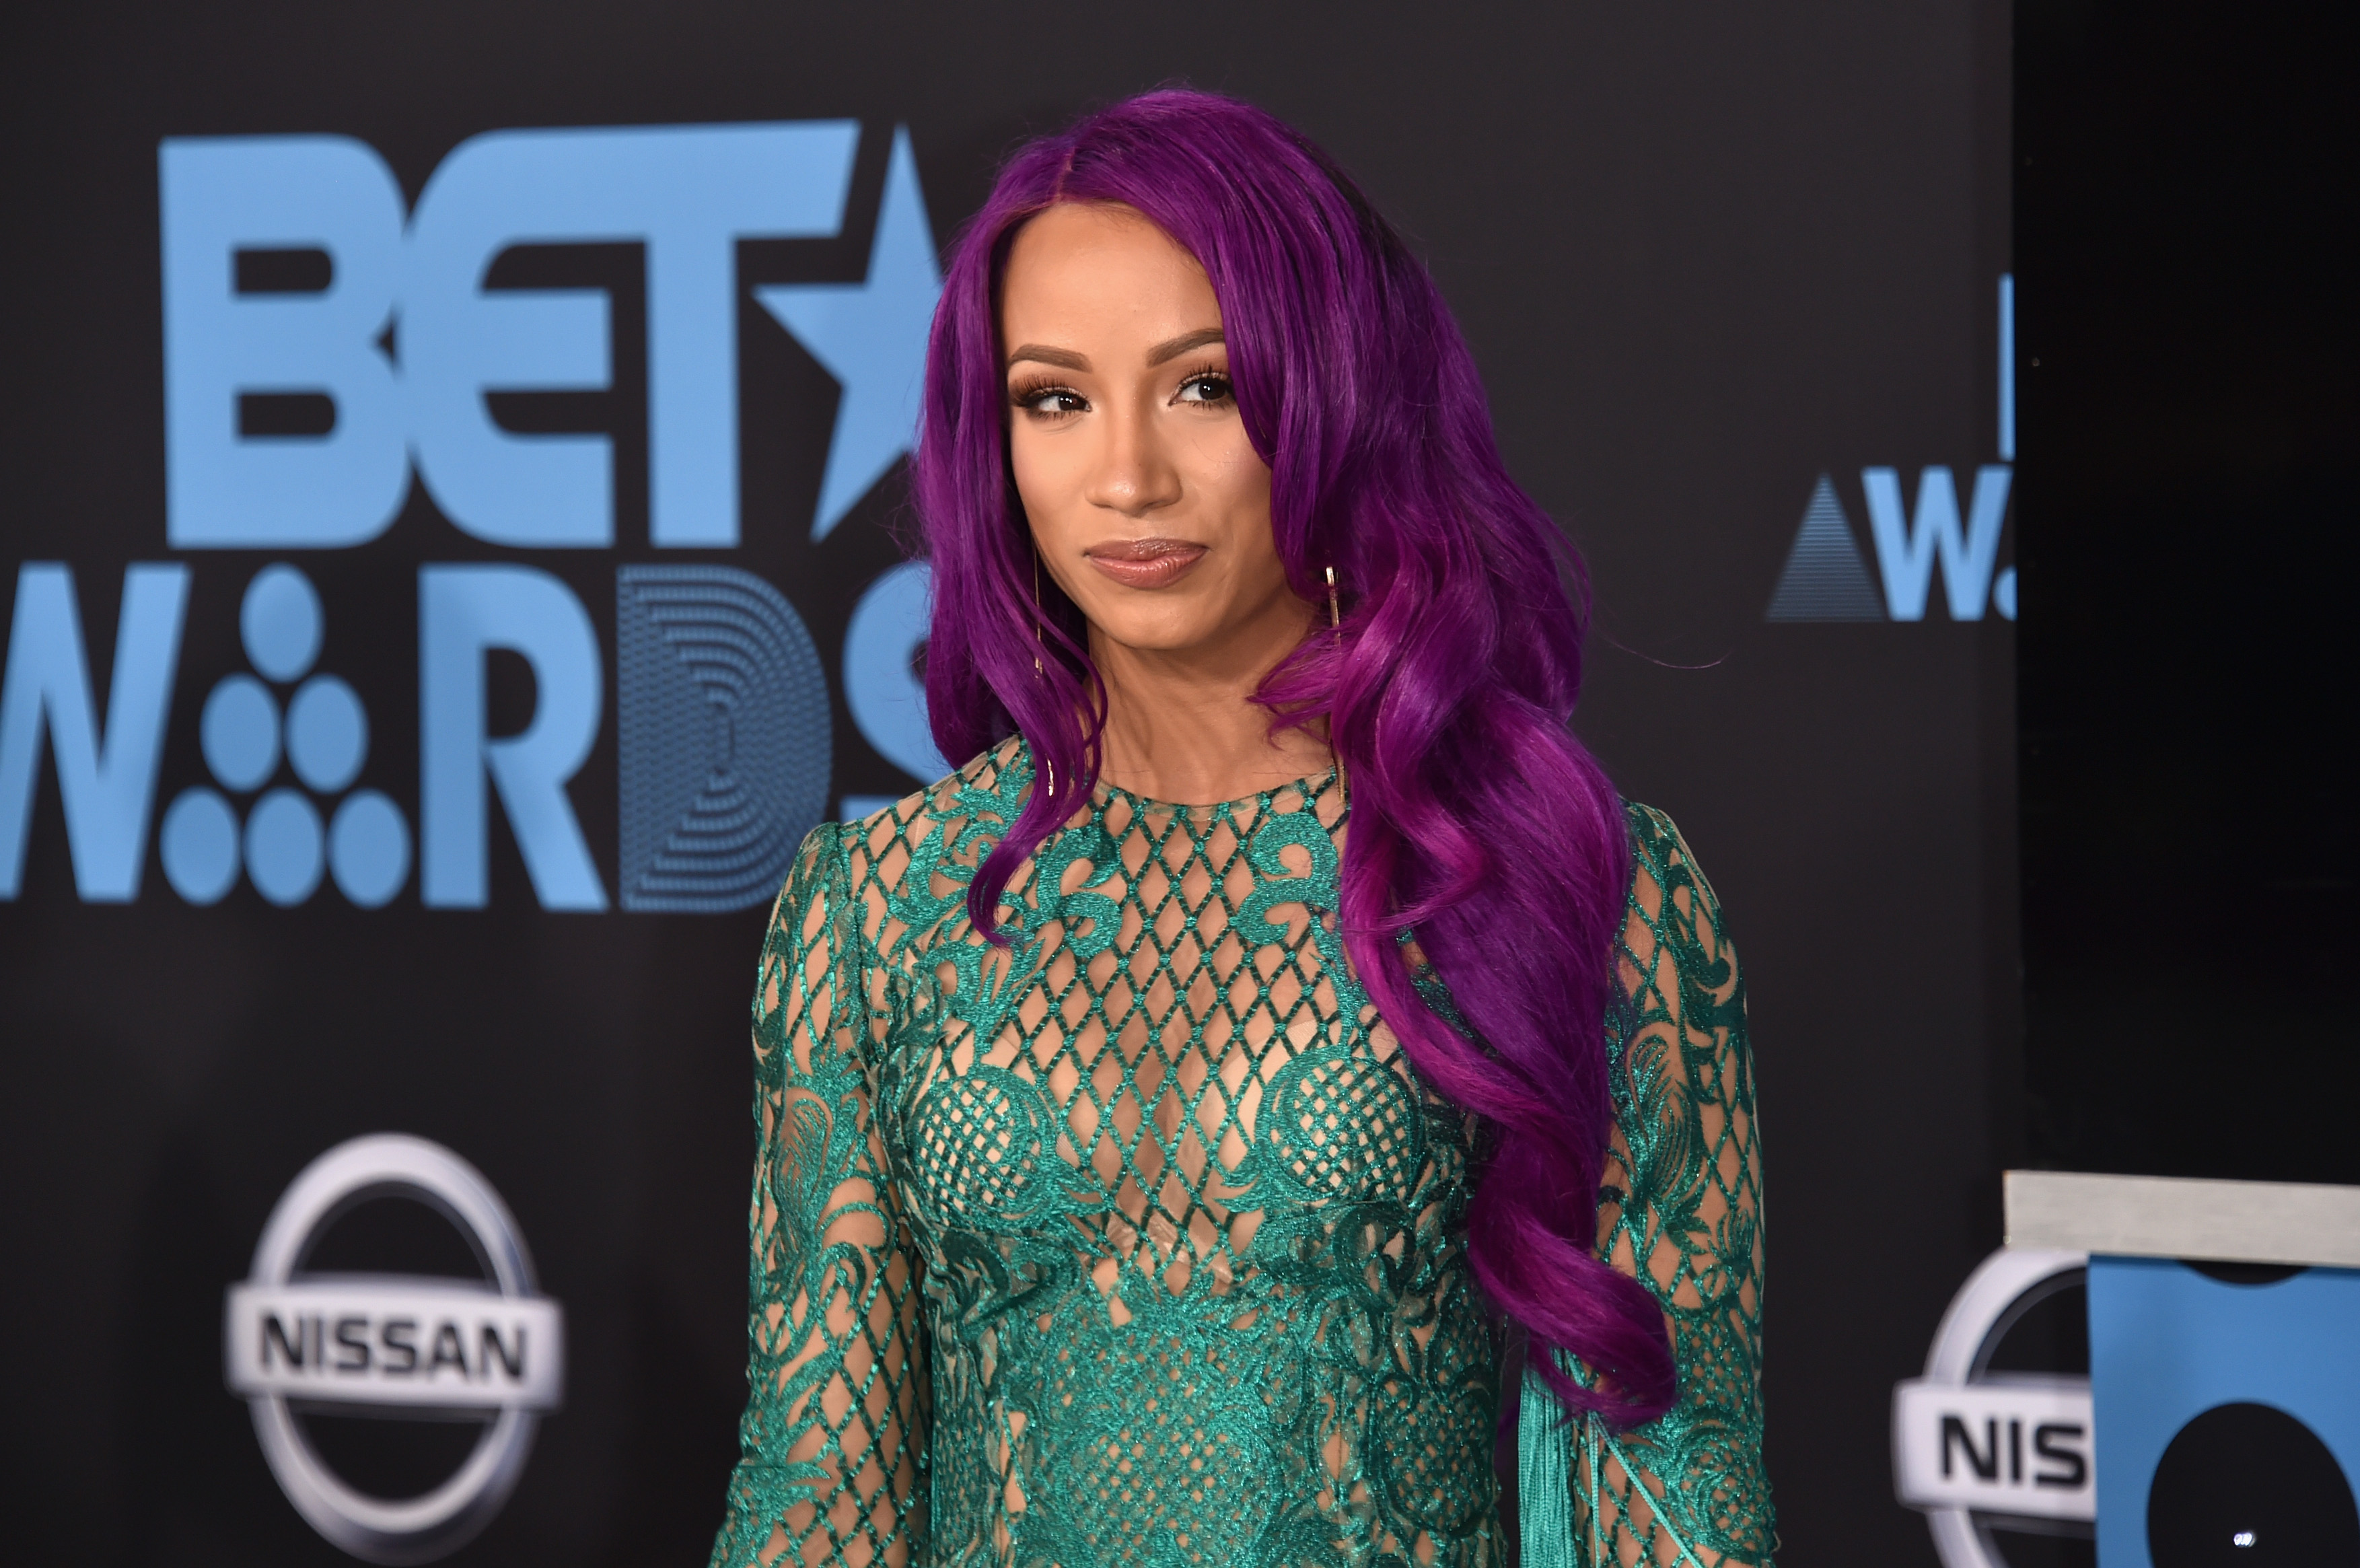 Wwe Star Sasha Banks Reportedly Joining The Cast Of The Mandalorian Brobibl...